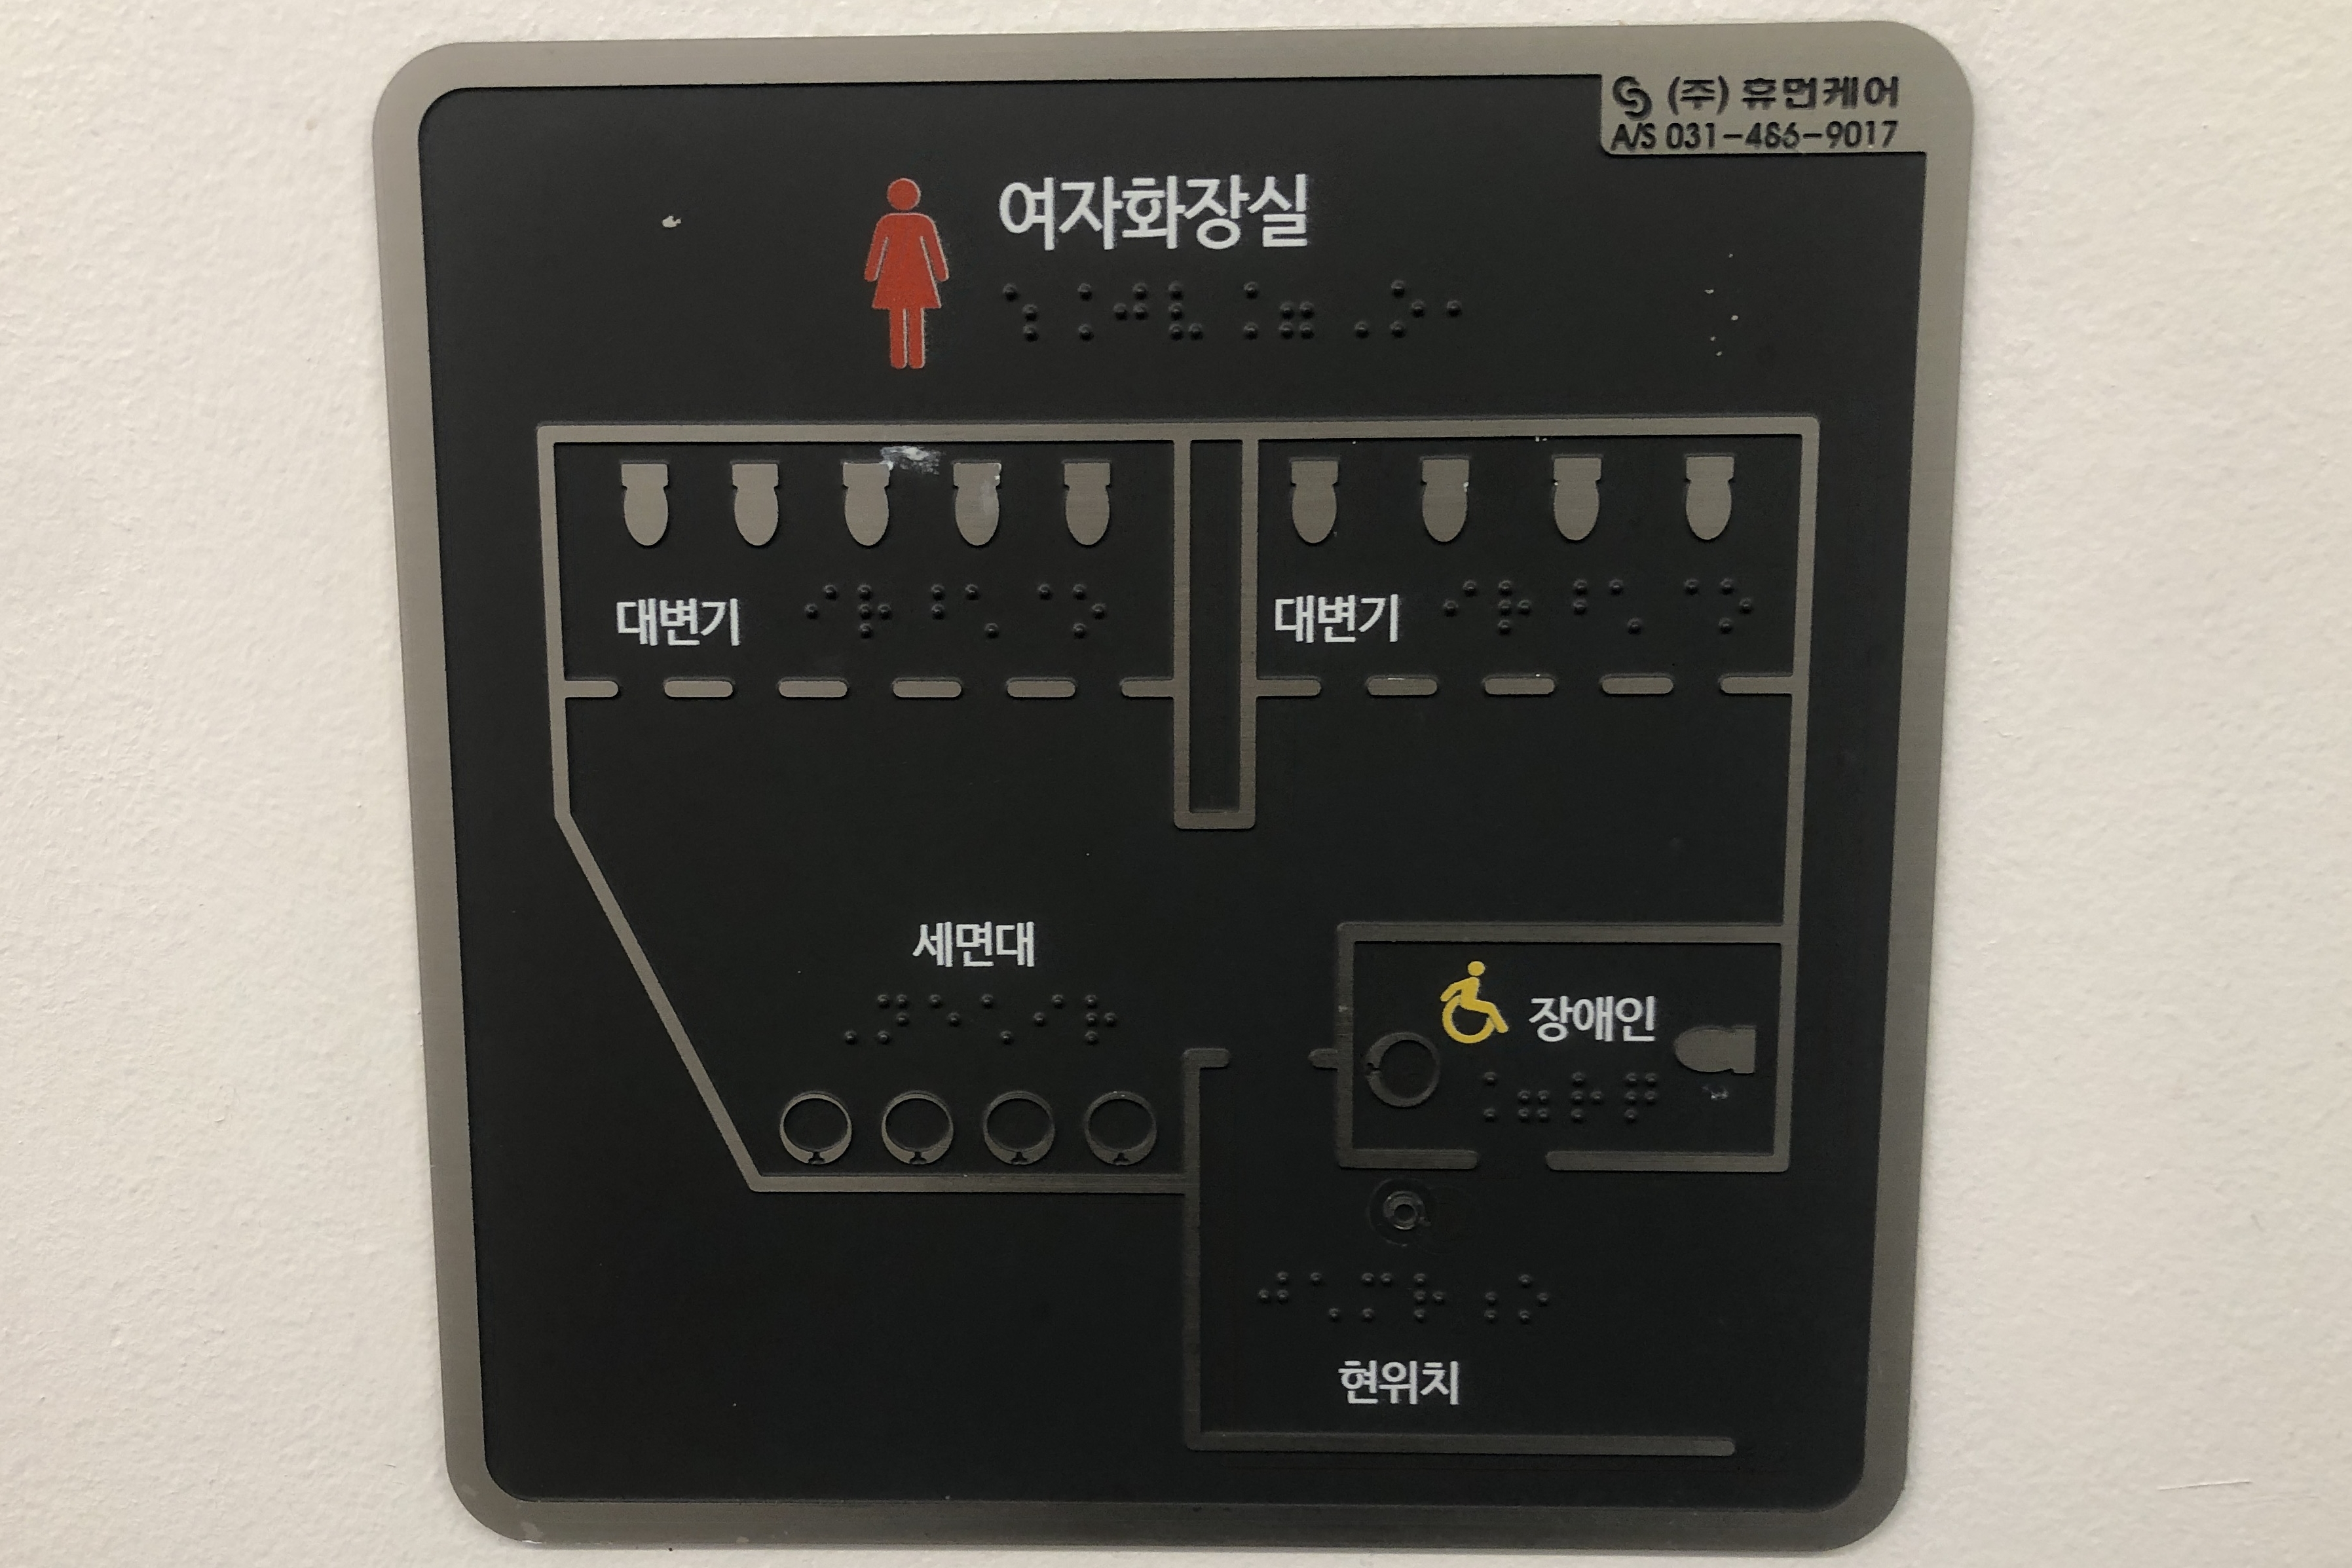 Accessible restroom for persons with disabilities0 : Information board for Toilet Structure with Korean braille and pictograms
